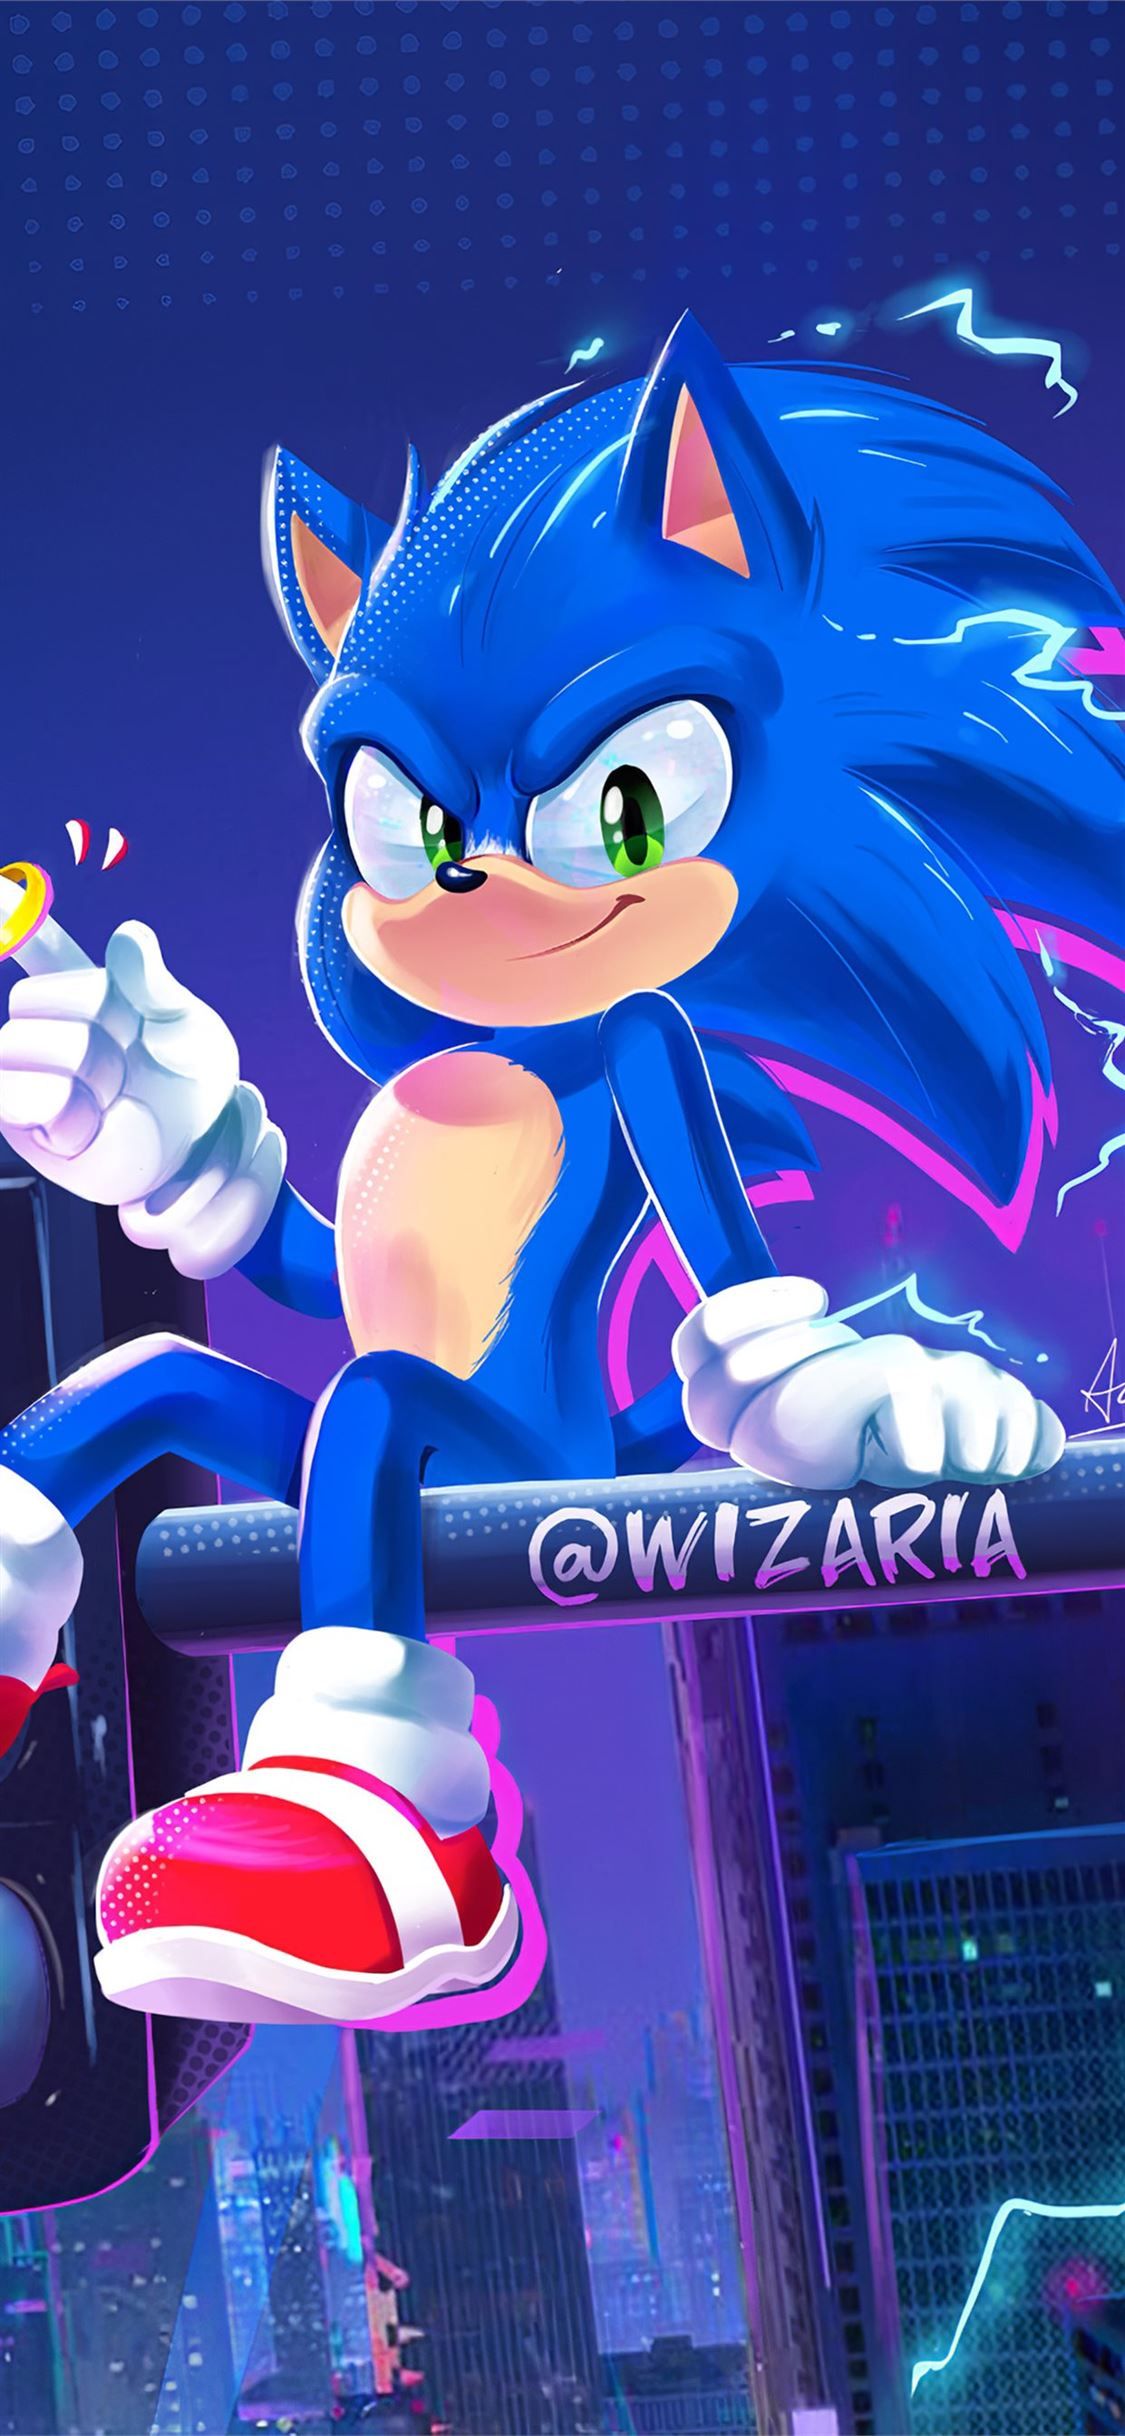 into the sonic verse 4k iPhone X Wallpaper Free Download